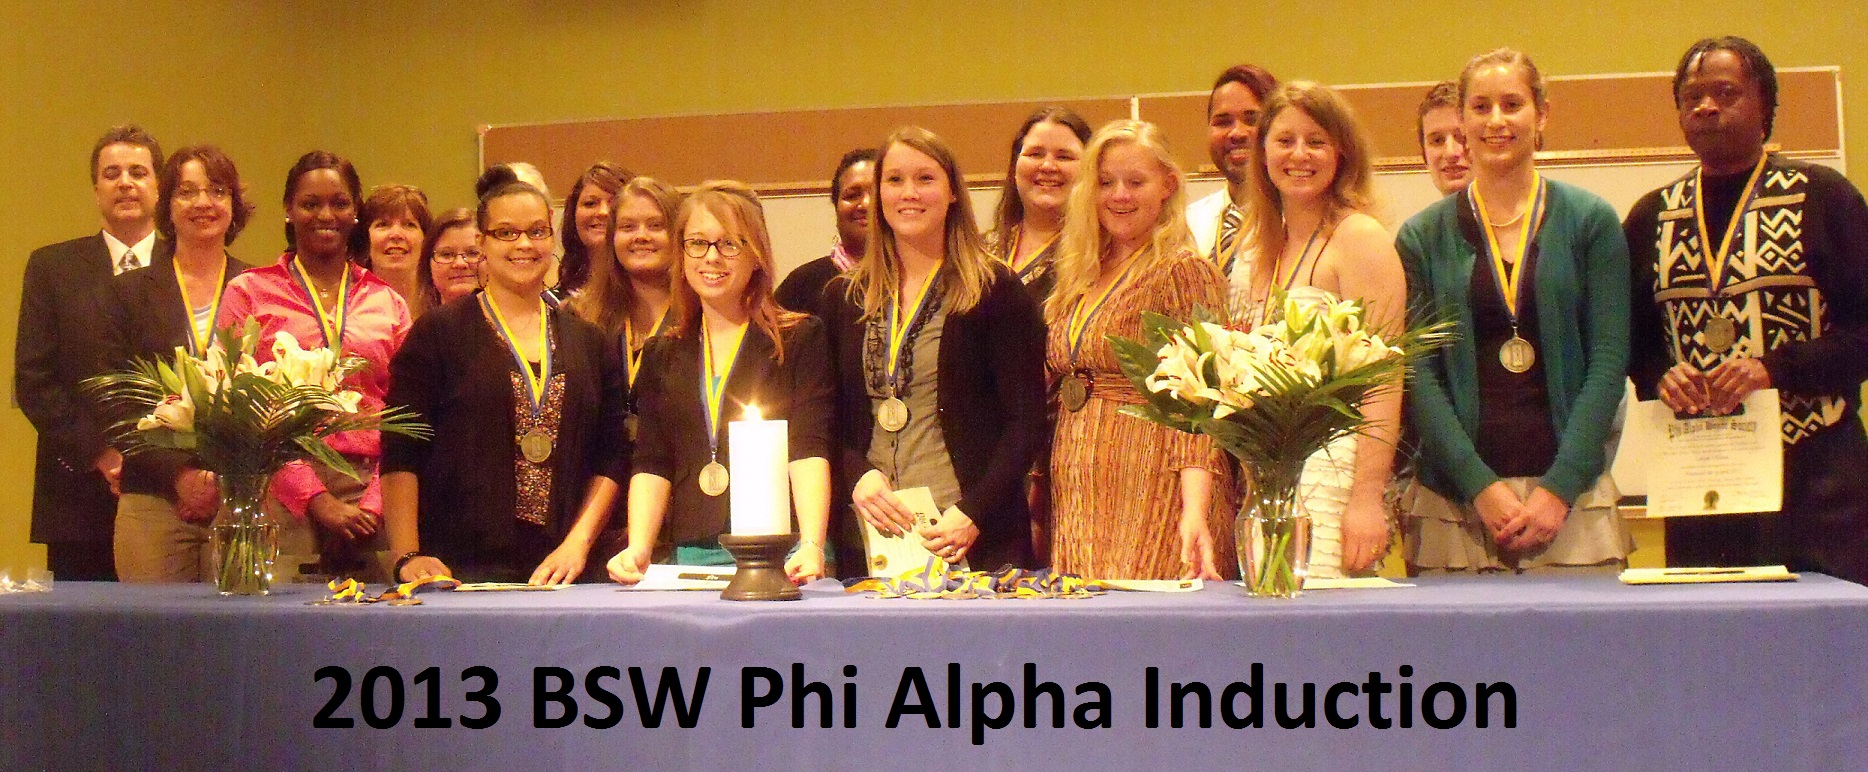 2013 Phi Alpha BSW Induction Photo